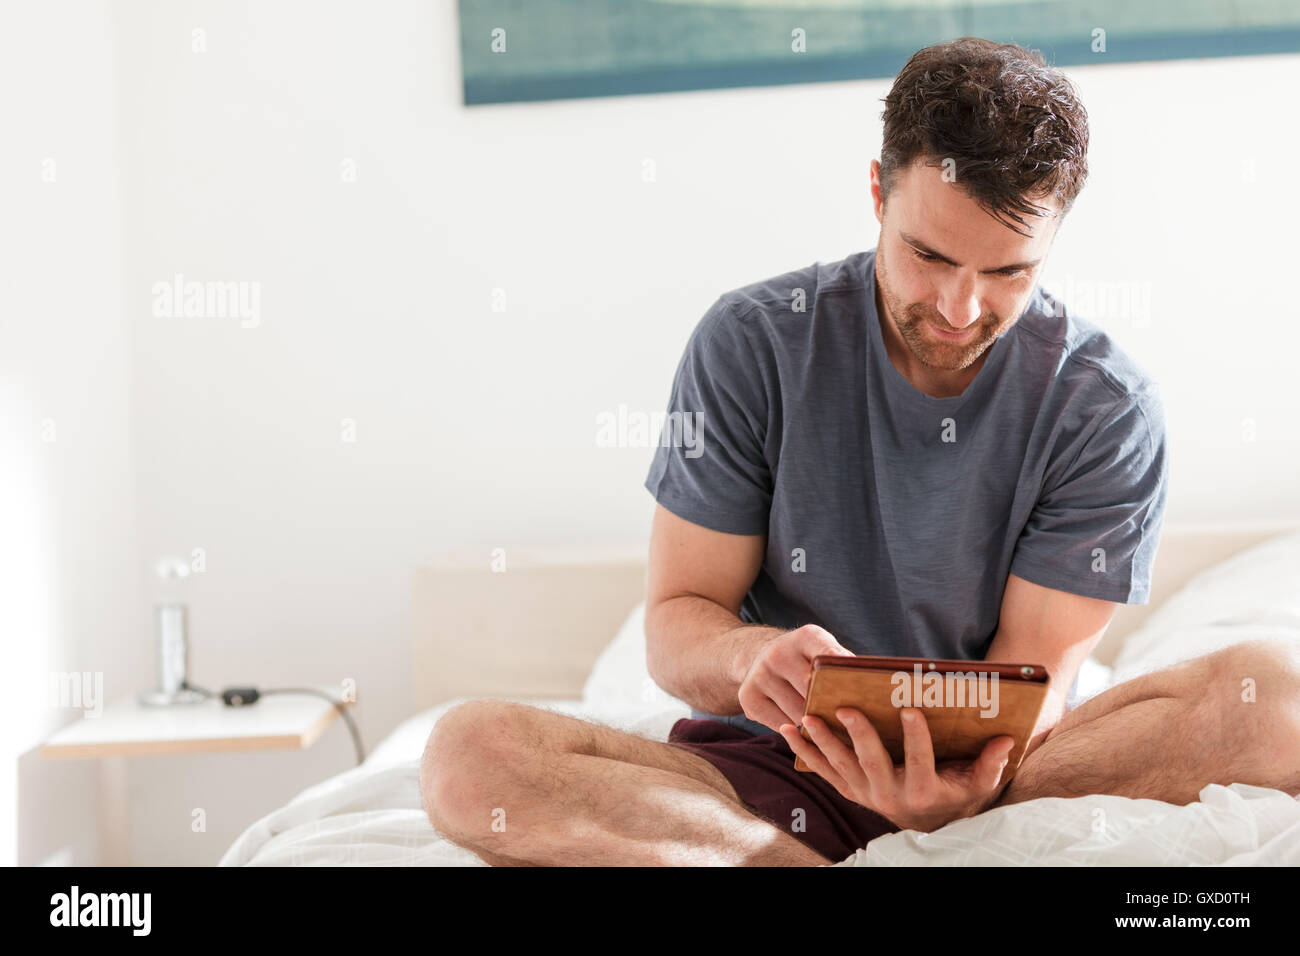 Man sitting on bed using digital tablet Stock Photo